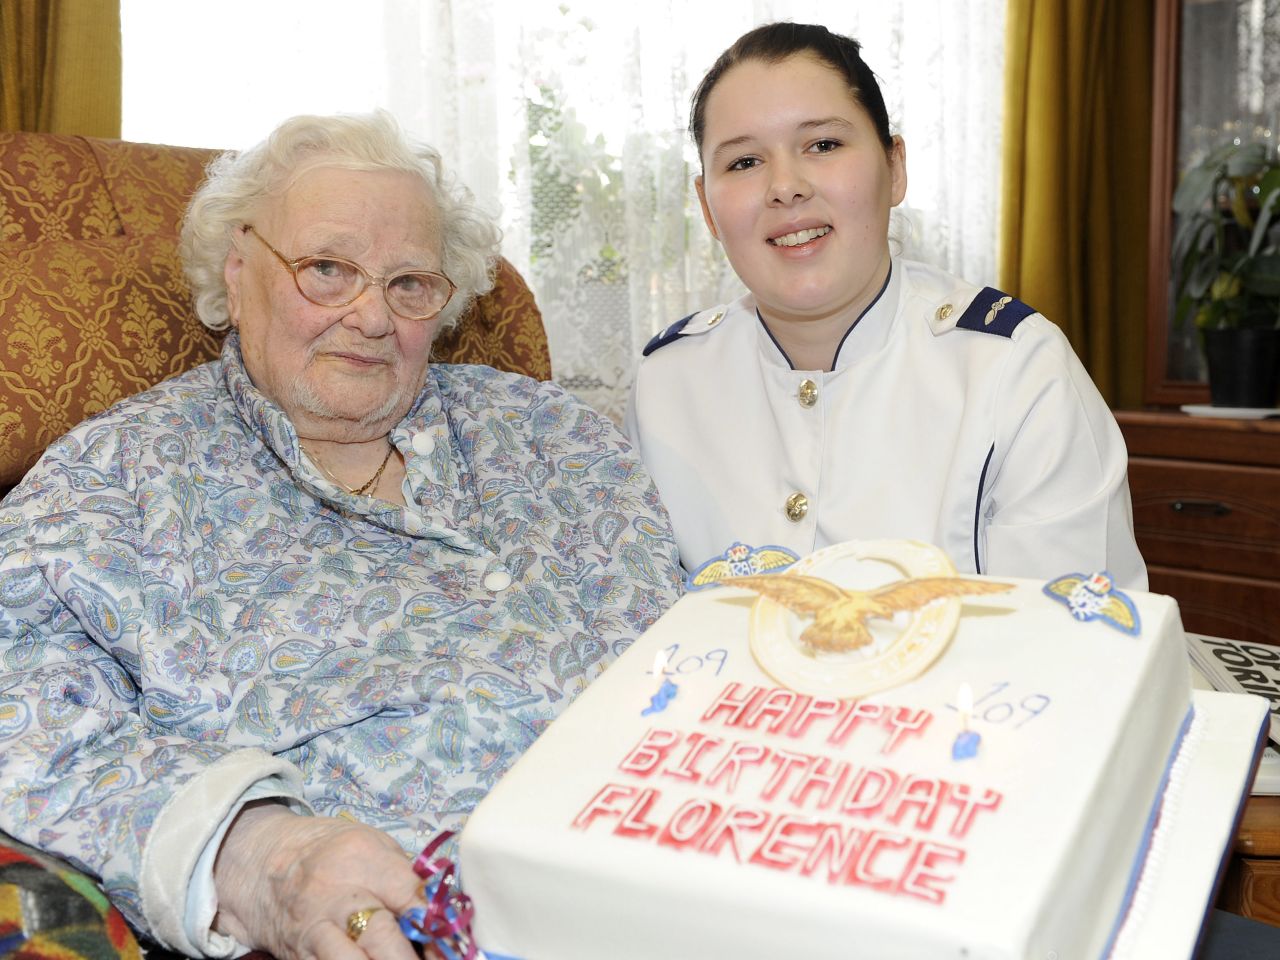 The last known surviving veteran of World War I died on February 4. <a href="http://news.blogs.cnn.com/2012/02/08/last-wwi-survivor-a-woman-dies-at-110">Florence Green</a>, 110, was a waitress in Britain's Royal Air Force.